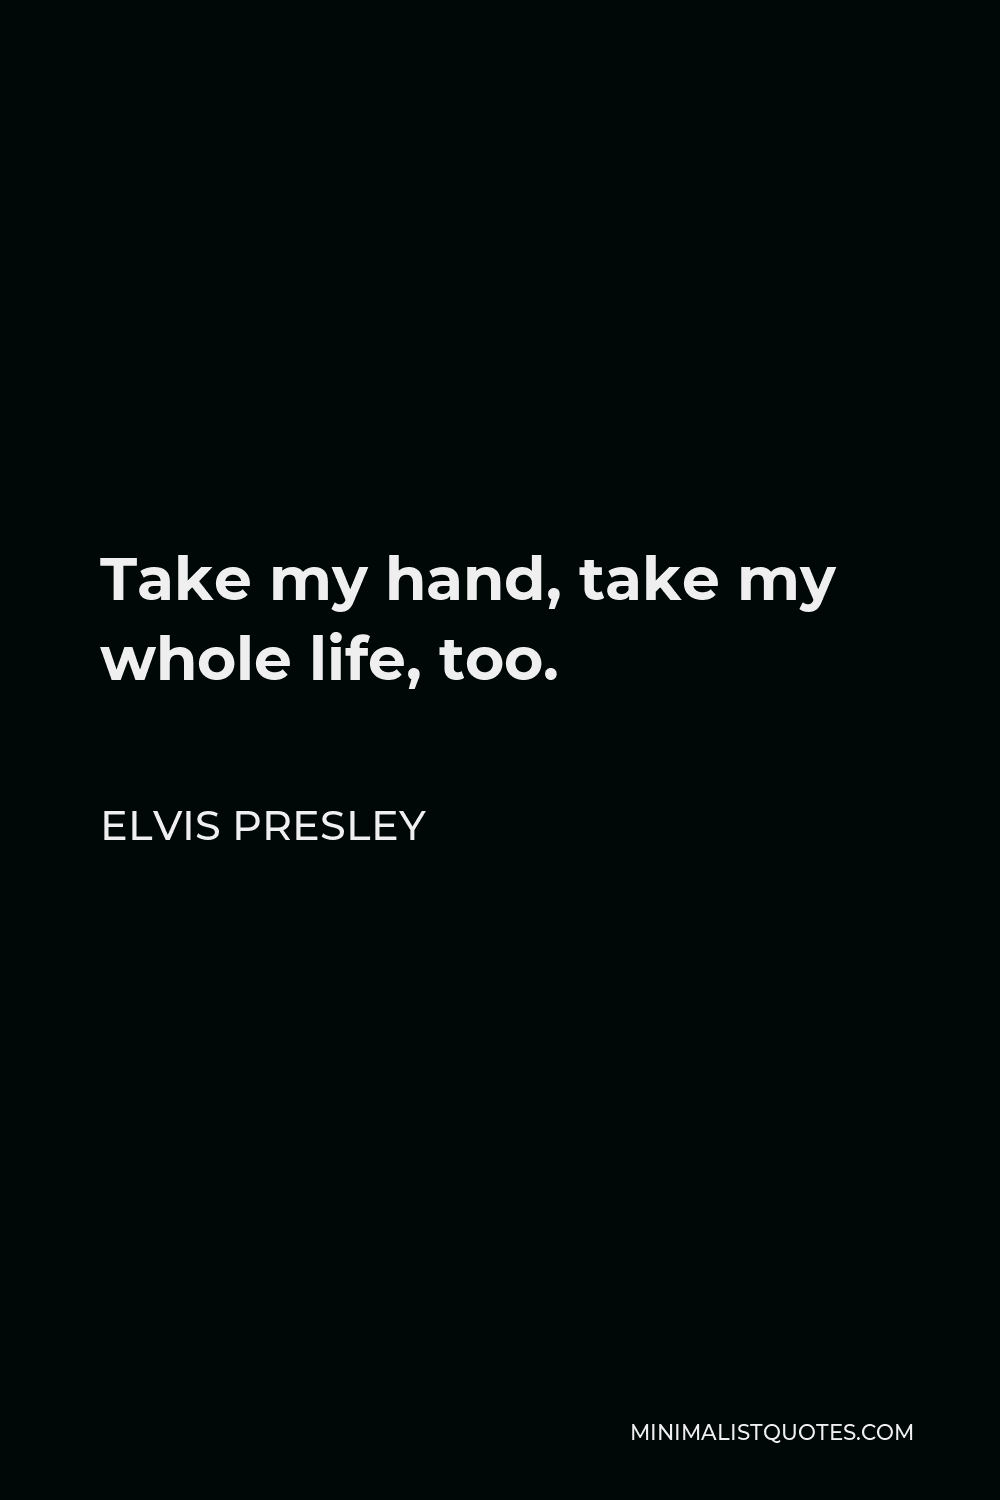 Elvis Presley Quote Take My Hand Take My Whole Life Too